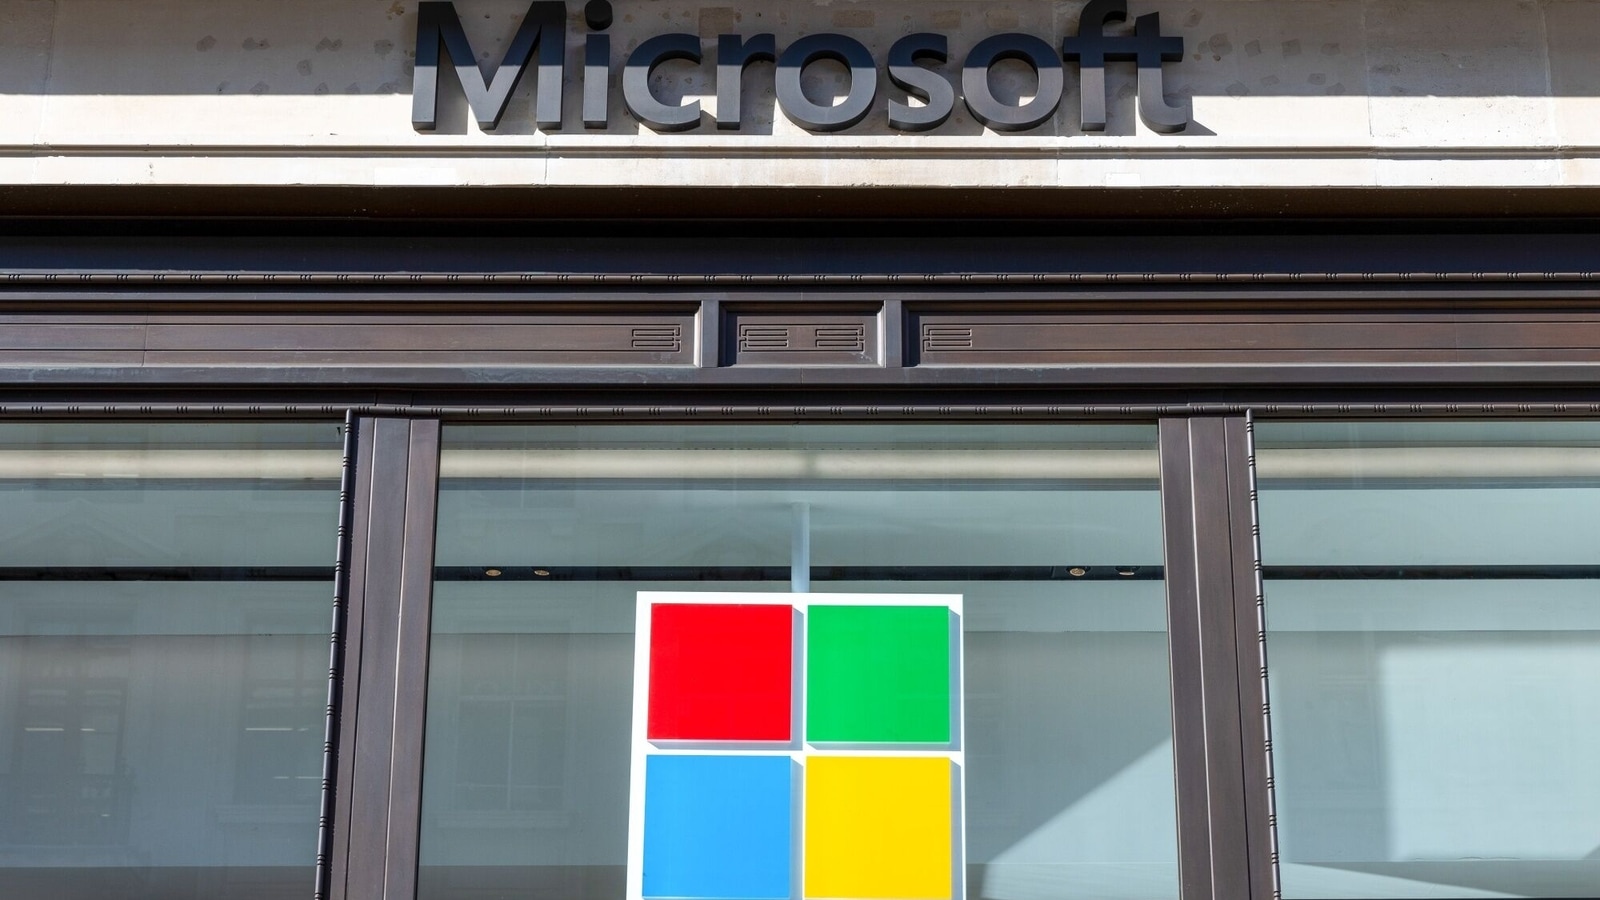 Microsoft and the UK Both Need to Admit Mistakes